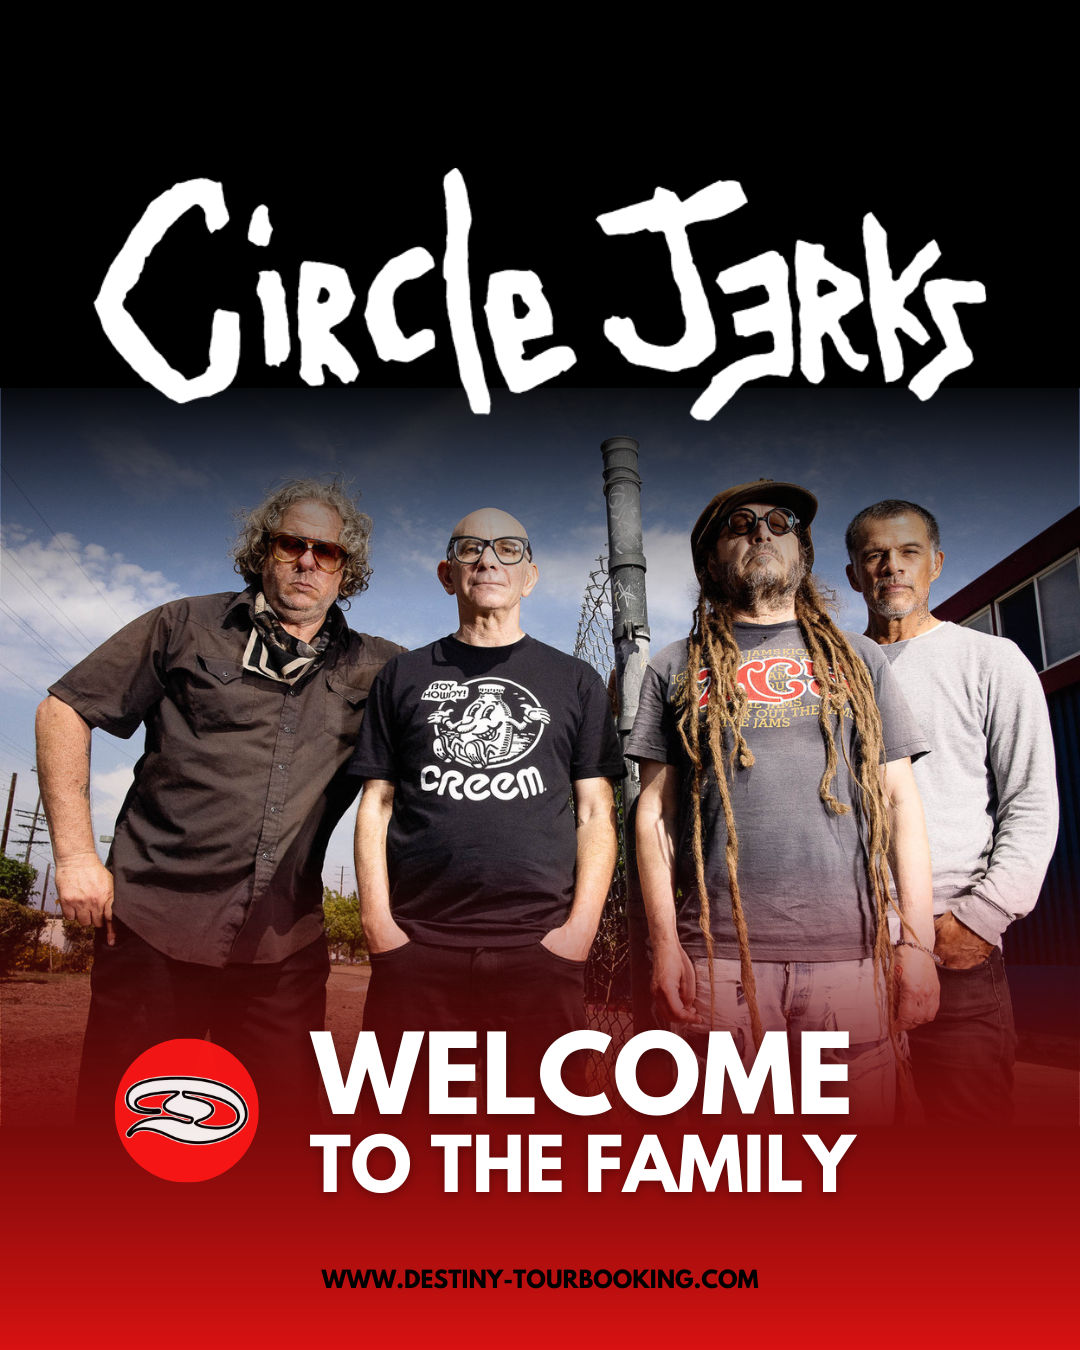 WELCOME TO THE FAMILY, CIRCLE JERKS!